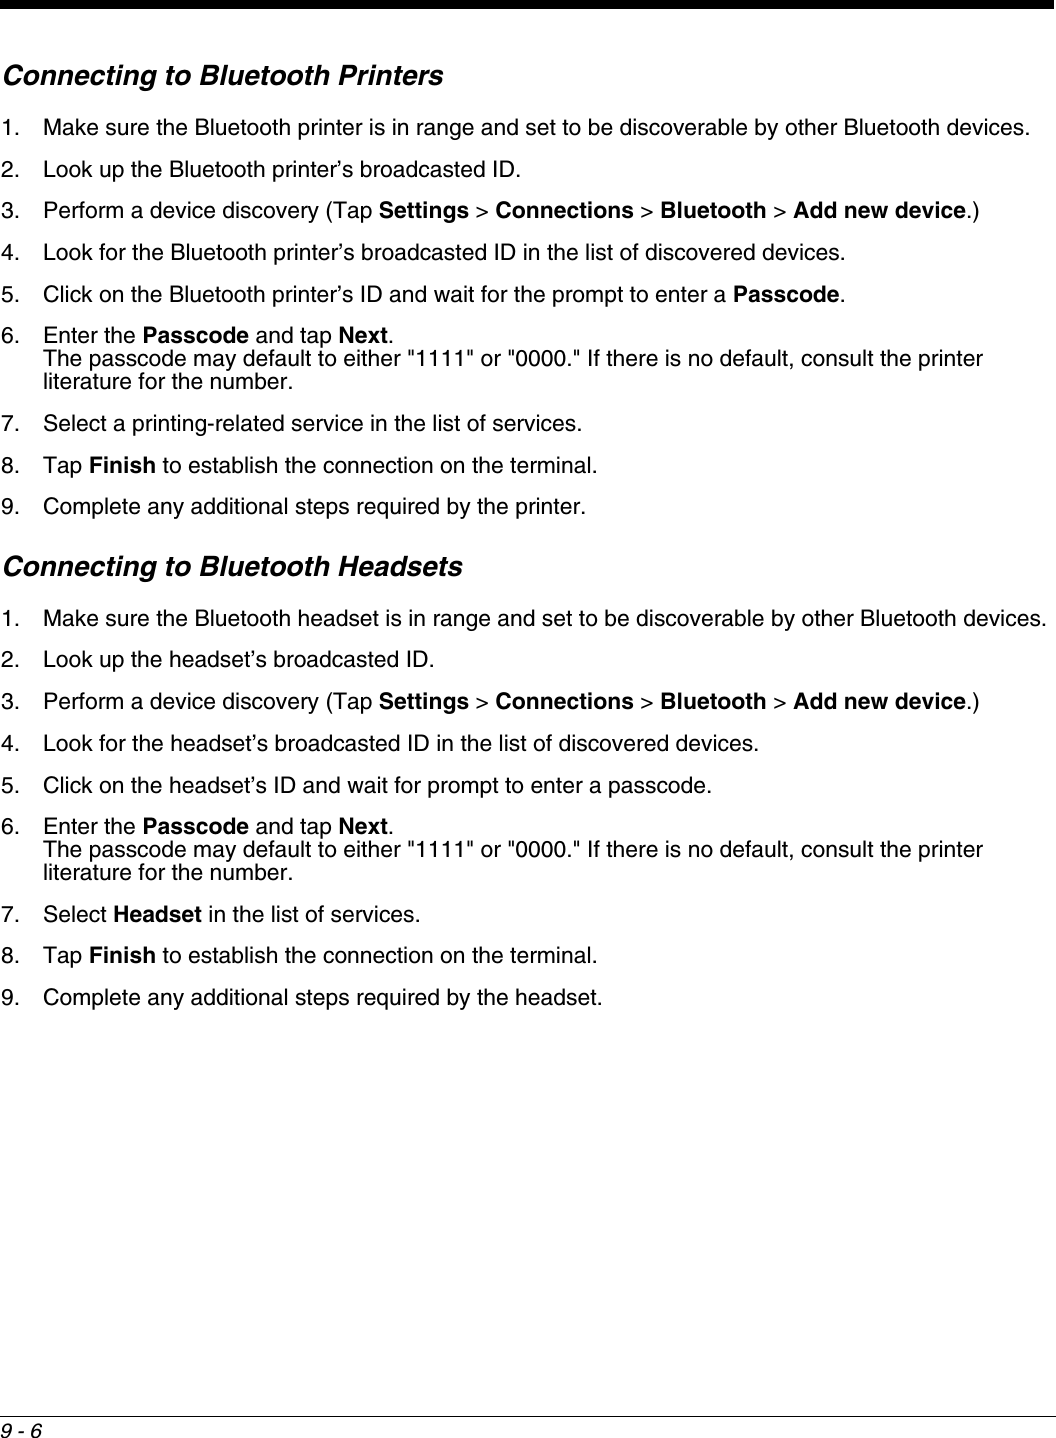 9 - 6Connecting to Bluetooth Printers1. Make sure the Bluetooth printer is in range and set to be discoverable by other Bluetooth devices.2. Look up the Bluetooth printer’s broadcasted ID.3. Perform a device discovery (Tap Settings &gt; Connections &gt; Bluetooth &gt; Add new device.)4. Look for the Bluetooth printer’s broadcasted ID in the list of discovered devices.5. Click on the Bluetooth printer’s ID and wait for the prompt to enter a Passcode.6. Enter the Passcode and tap Next. The passcode may default to either &quot;1111&quot; or &quot;0000.&quot; If there is no default, consult the printer literature for the number.7. Select a printing-related service in the list of services.8. Tap Finish to establish the connection on the terminal.9. Complete any additional steps required by the printer. Connecting to Bluetooth Headsets1. Make sure the Bluetooth headset is in range and set to be discoverable by other Bluetooth devices.2. Look up the headset’s broadcasted ID.3. Perform a device discovery (Tap Settings &gt; Connections &gt; Bluetooth &gt; Add new device.)4. Look for the headset’s broadcasted ID in the list of discovered devices.5. Click on the headset’s ID and wait for prompt to enter a passcode.6. Enter the Passcode and tap Next. The passcode may default to either &quot;1111&quot; or &quot;0000.&quot; If there is no default, consult the printer literature for the number.7. Select Headset in the list of services.8. Tap Finish to establish the connection on the terminal.9. Complete any additional steps required by the headset. 